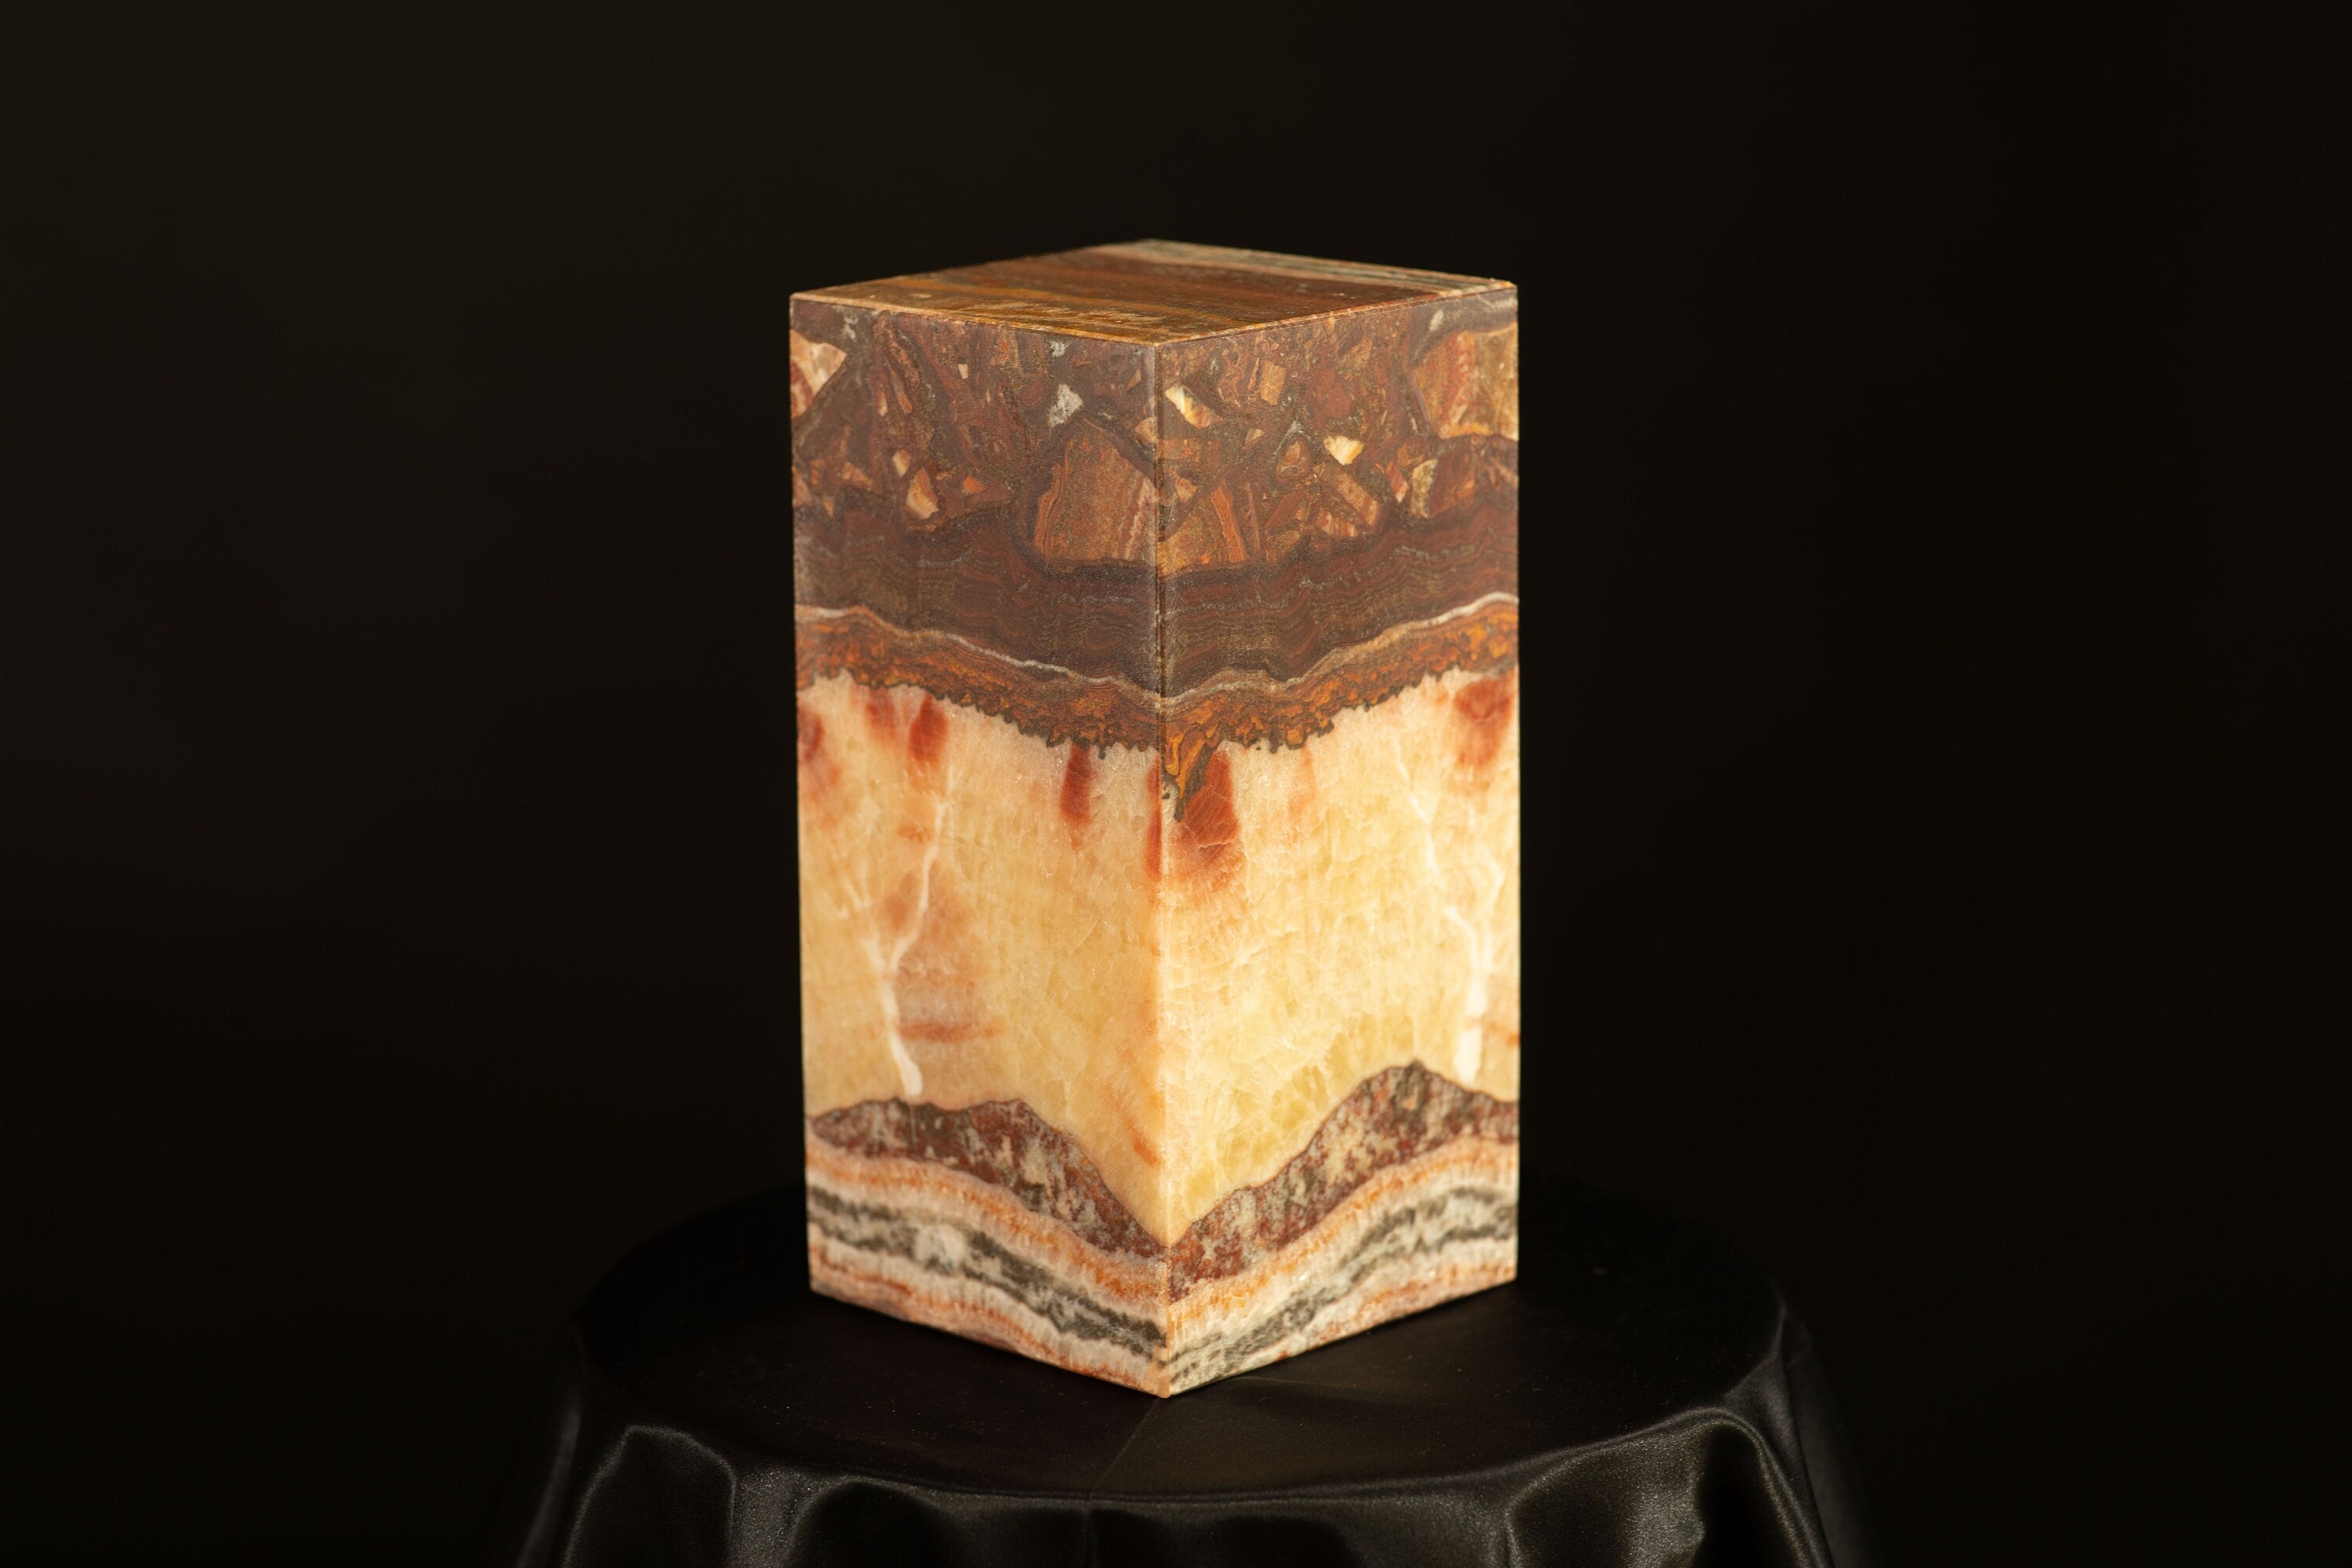 Soothing Glow Onyx Lamp - Himalayan Salt Lamp - Hand-carved - Lamp Bedside - Home & Decor